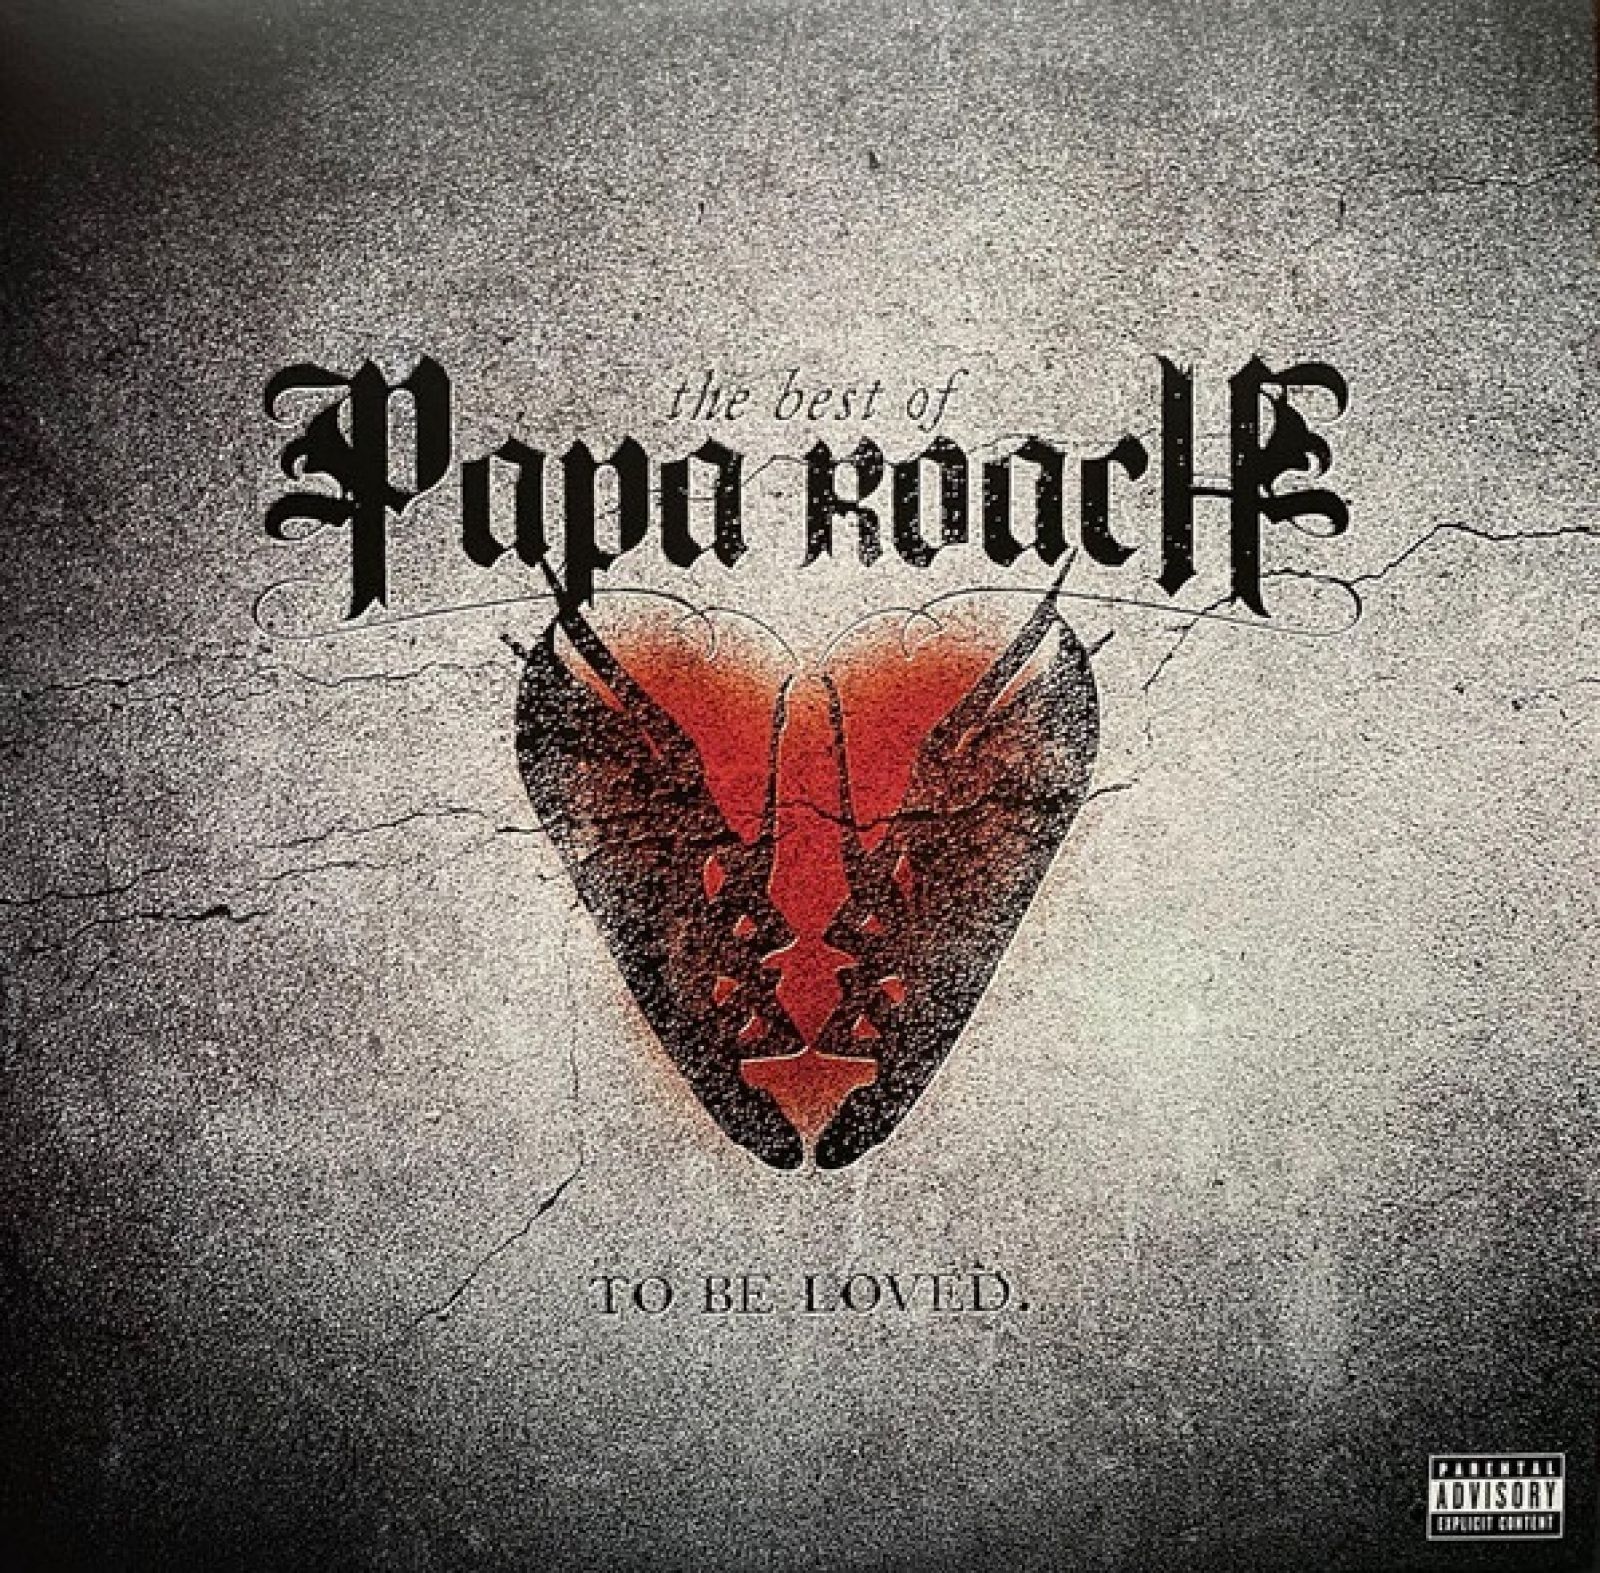 Виниловая пластинка Papa Roach, The Best Of Papa Roach: To Be Loved. (Coloured) (0600753978313) jesus loves me